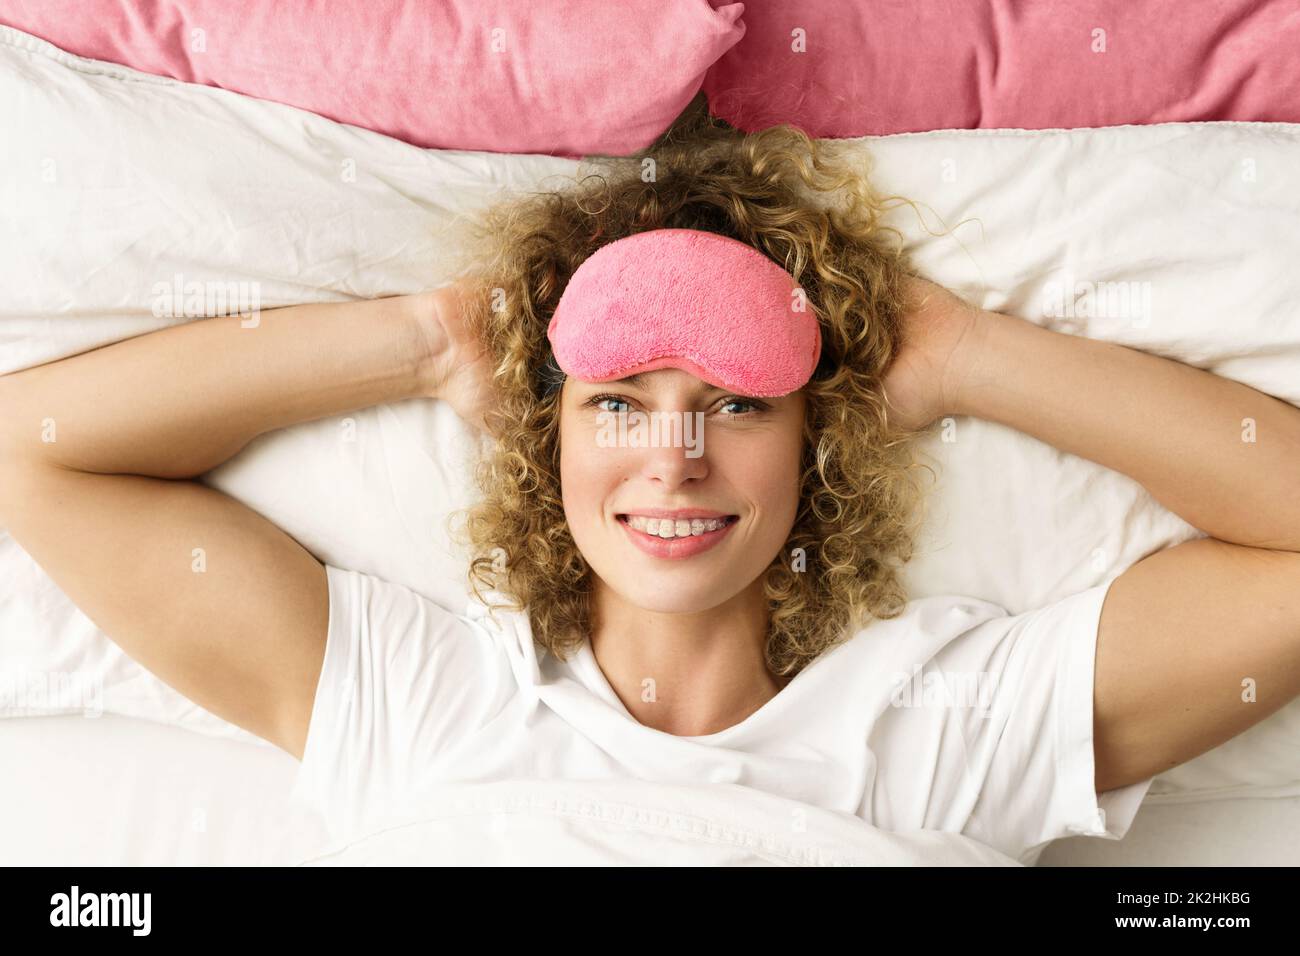 Beautiful woman with curly hair waking up after good sleep Stock Photo